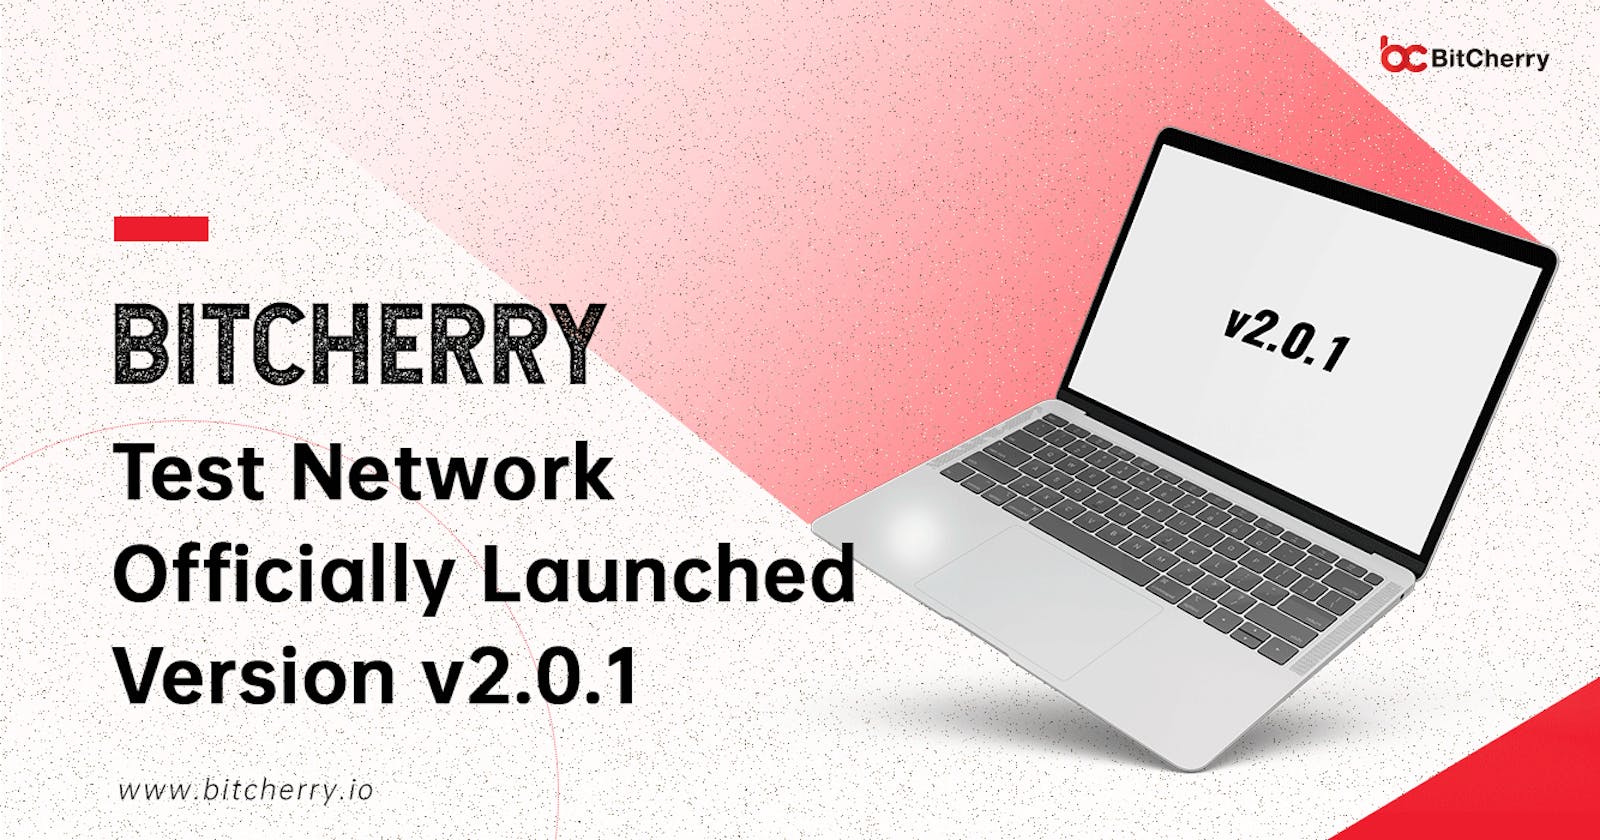 Sharing| BitCherry Test Network Officially Launched Version v2.0.1